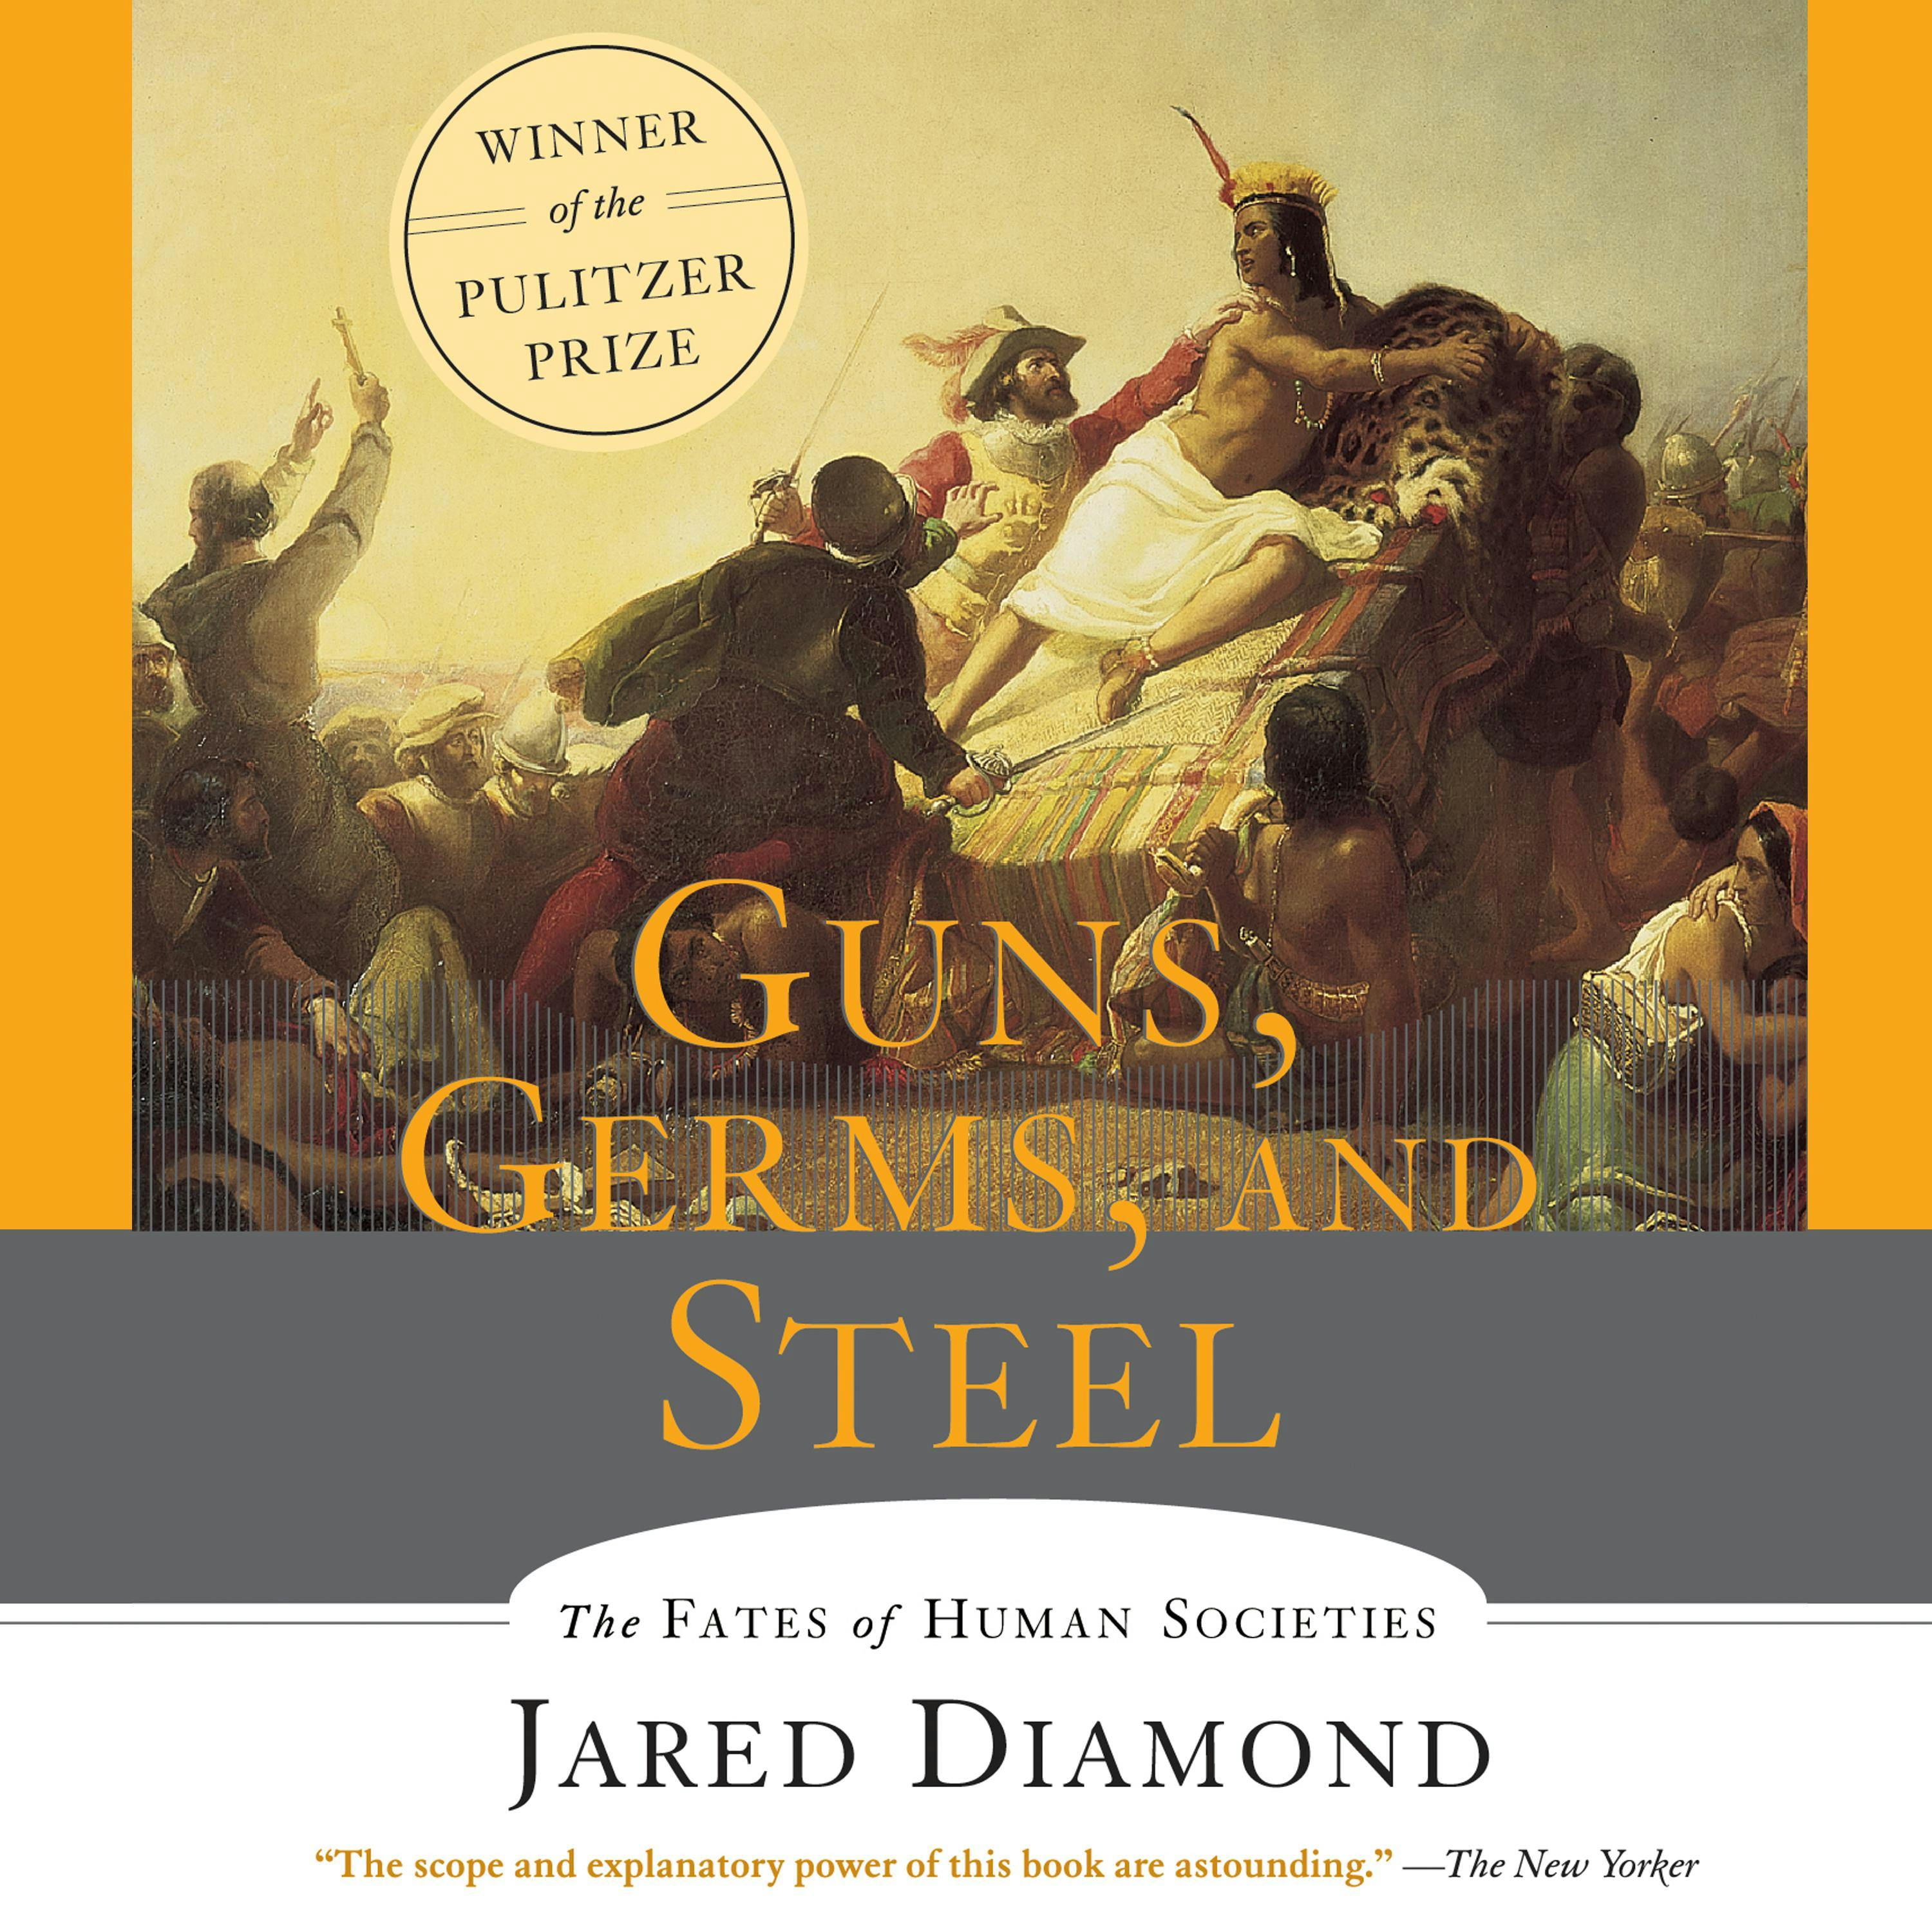 Guns, Germs and Steel: The Fates of Human Societies - Jared Diamond